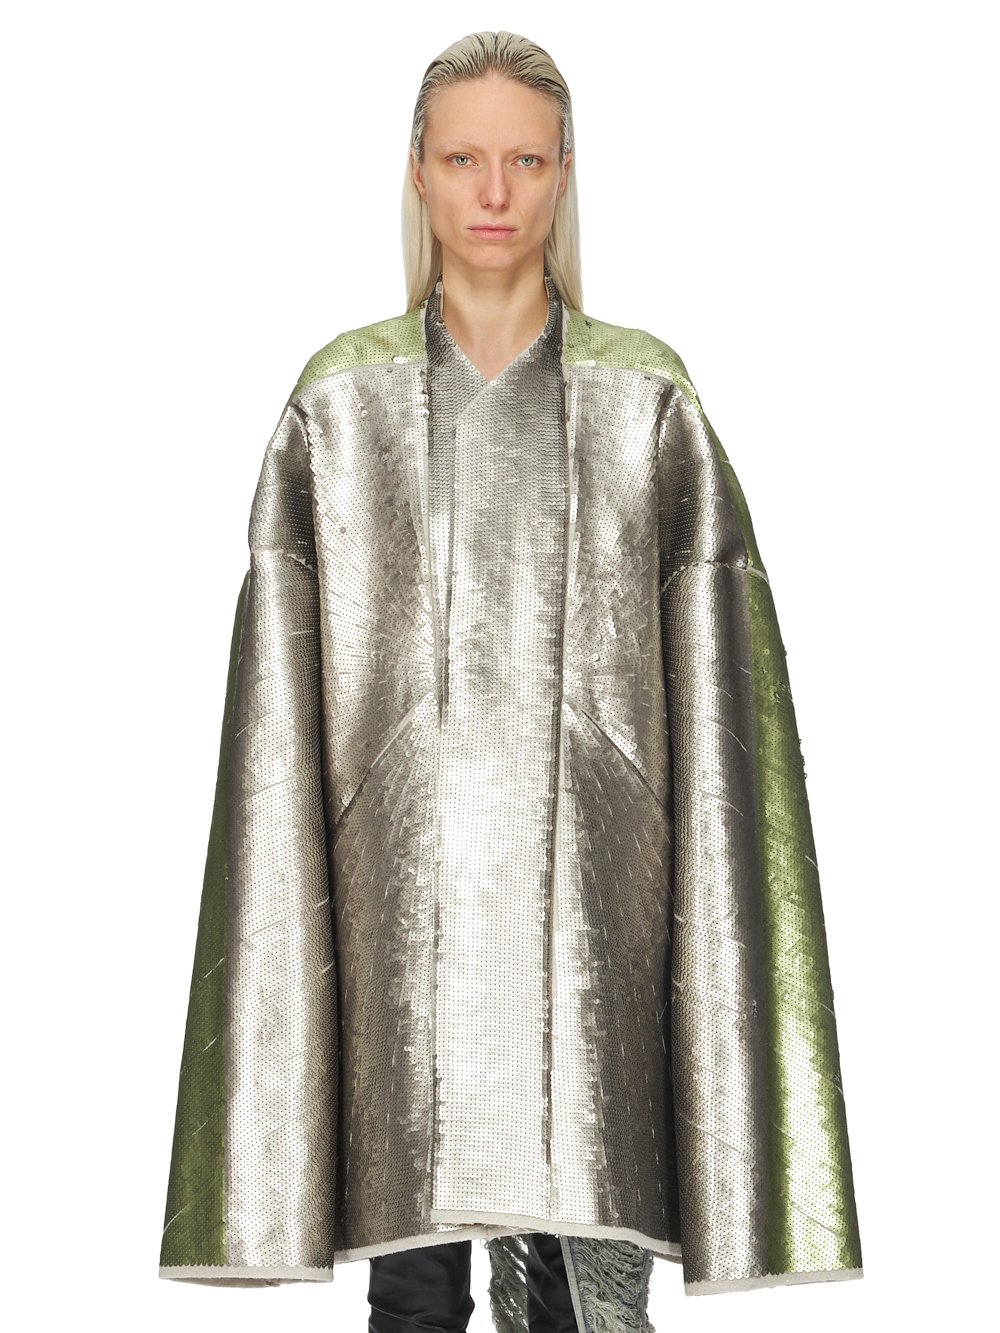 RICK OWENS FW23 LUXOR RUNWAY SEQUINNED BEACH JKT IN PEARL AND ACID RADIANCE SEQUIN EMBROIDERED BOILED WOOL